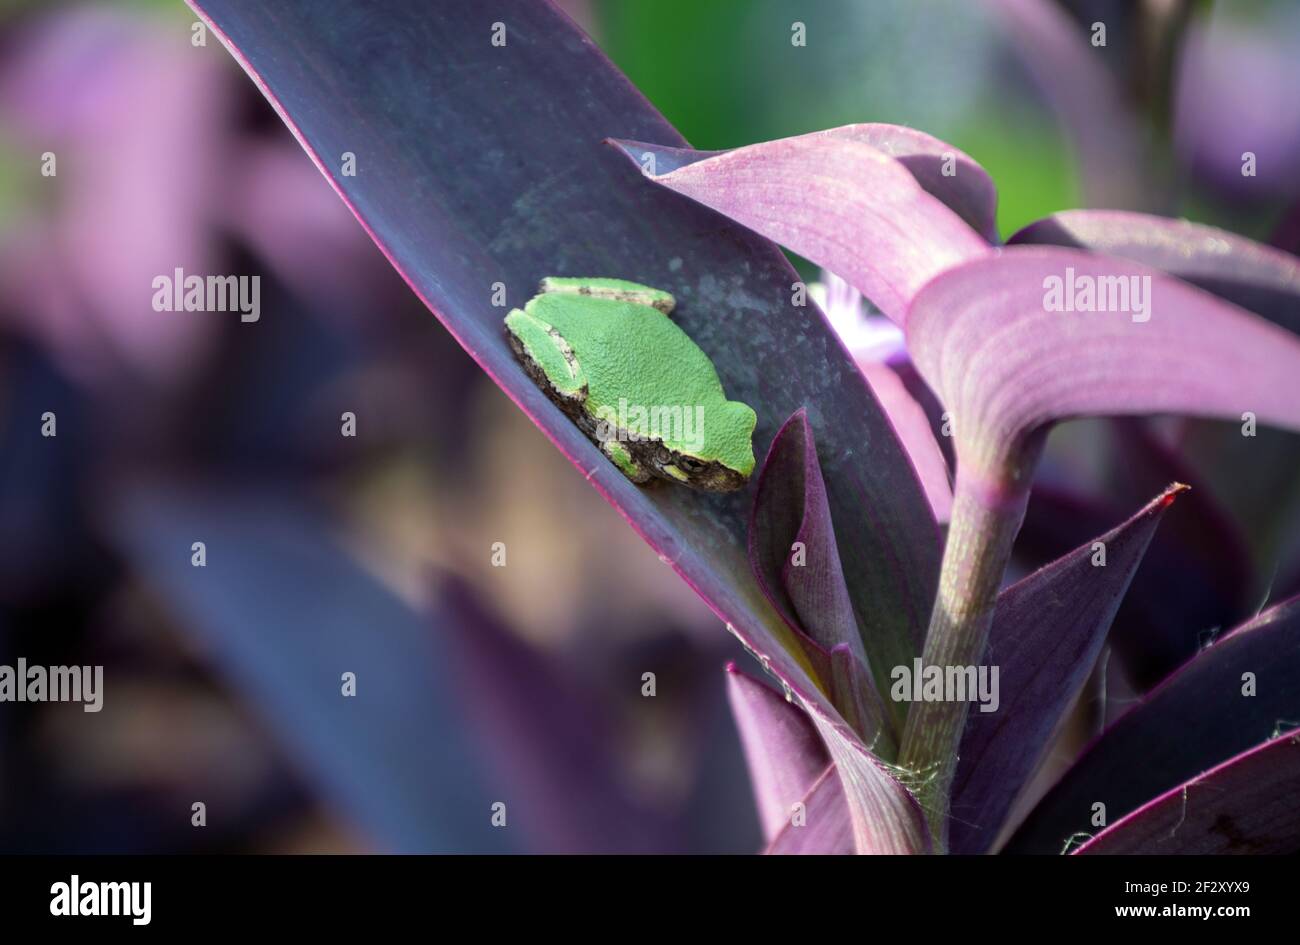 A little green treefrog rests contently on the purple leaf of a wandering jew plant in Missouri. Bokeh effect draws attention to the detail of the fro Stock Photo